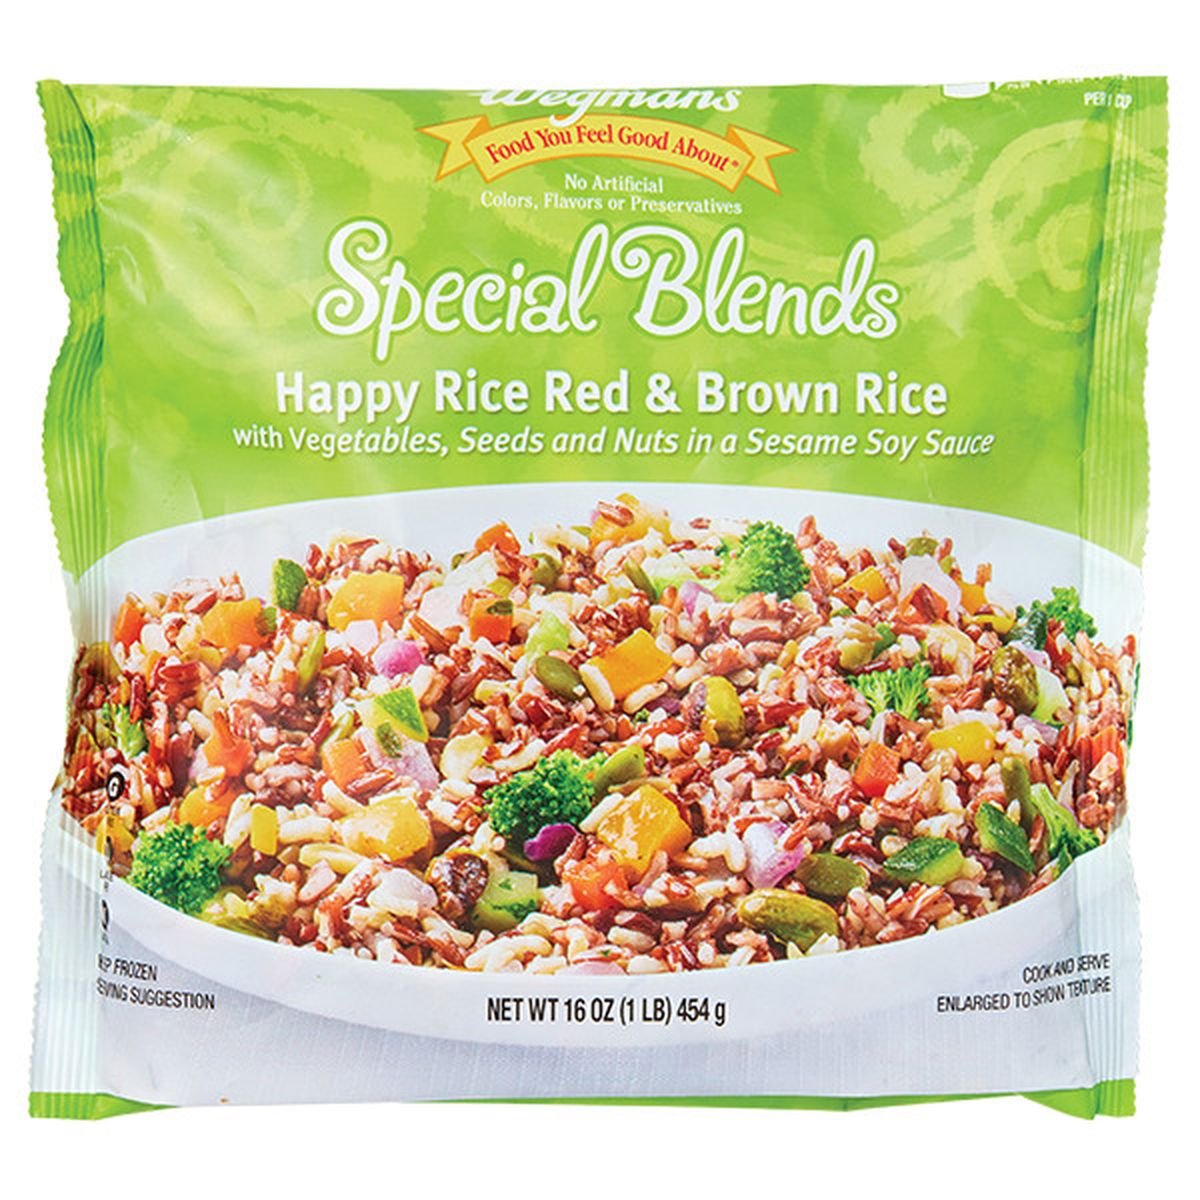 Calories in Wegmans Special Blends Happy Rice Red and Brown Rice